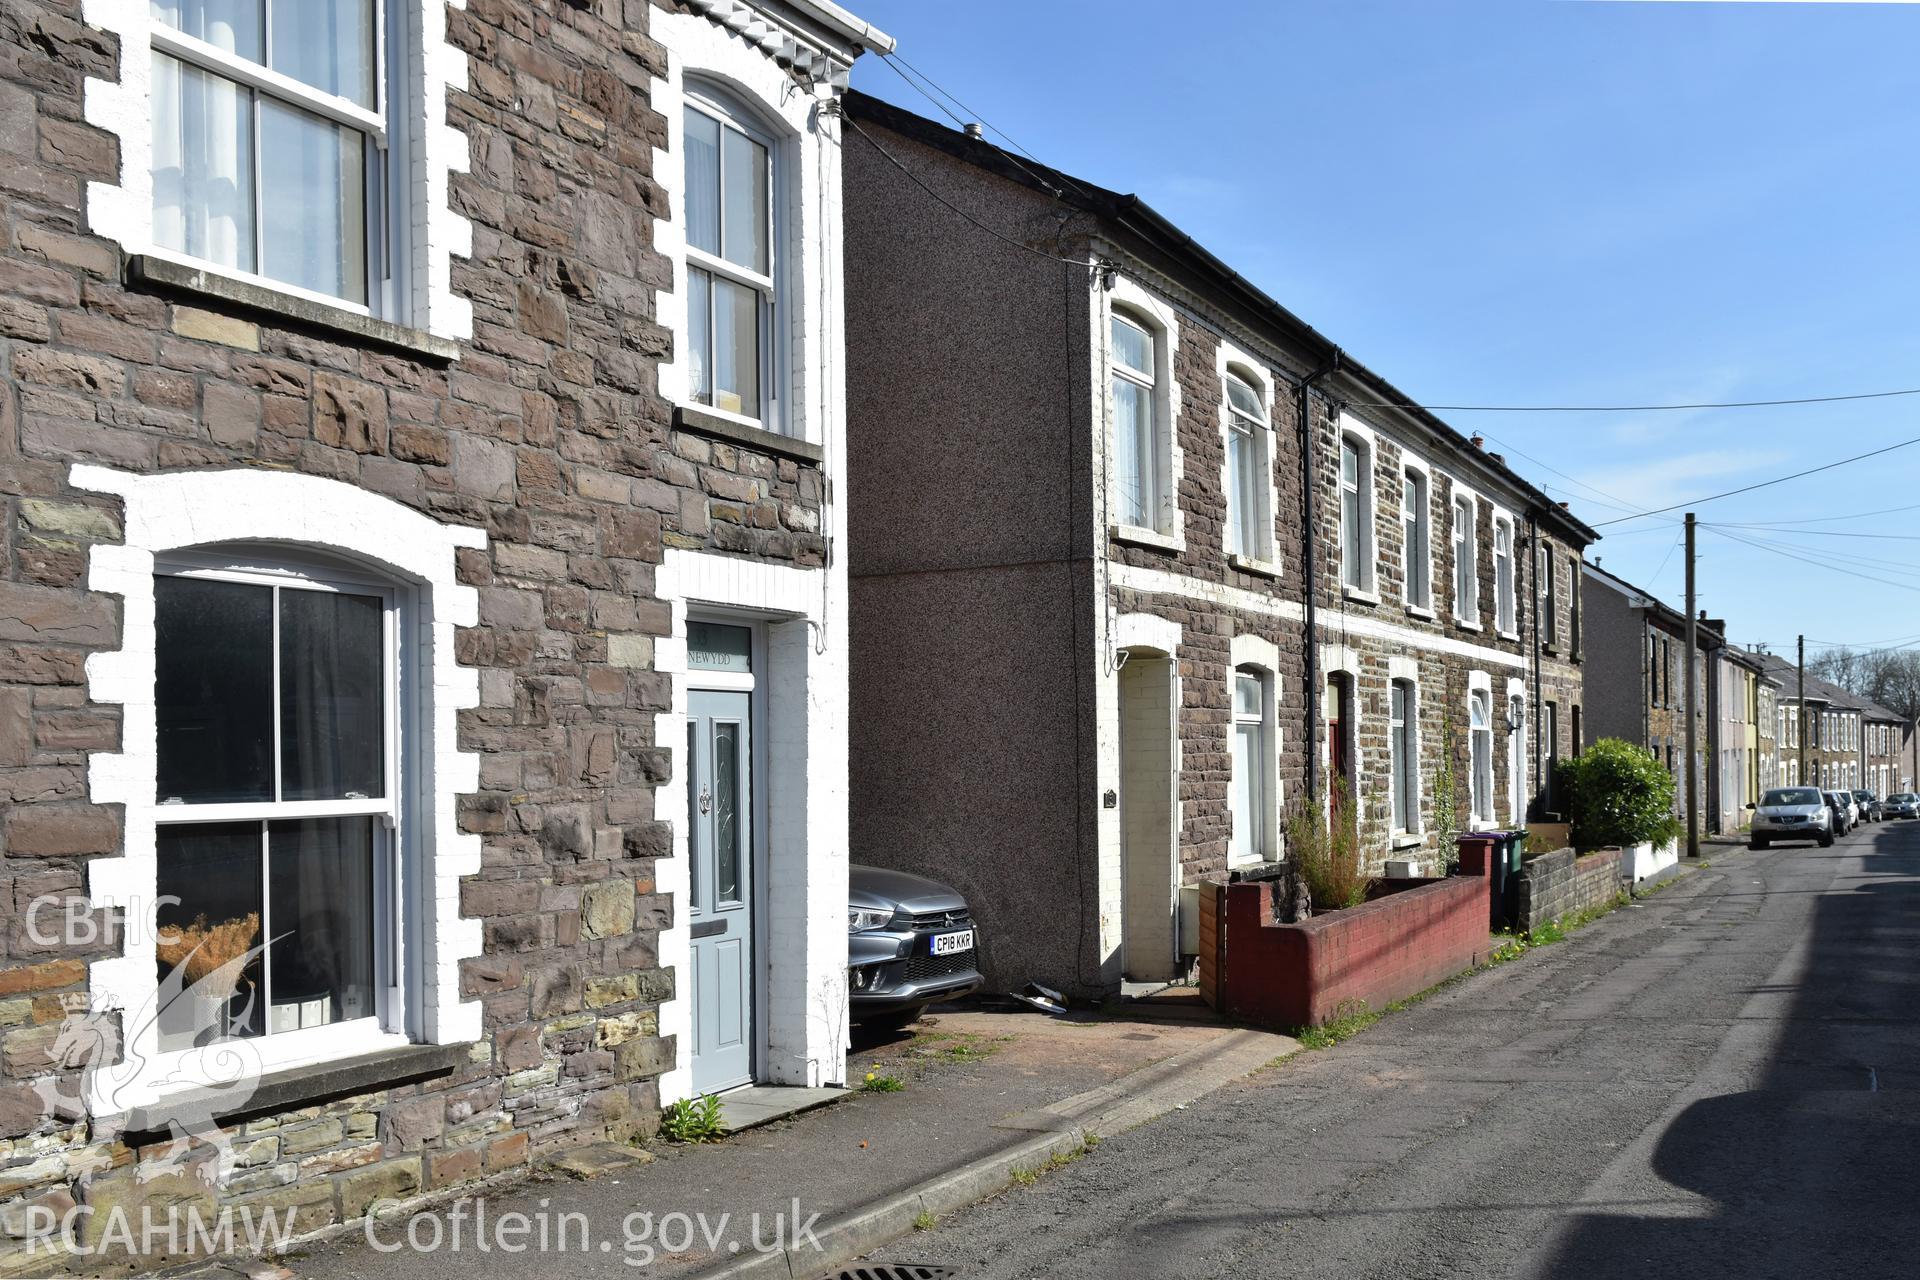 Exterior view of terraced housing in the Pontnewydd area of Cwmbran, photographed by Susan Fielding of RCAHMW on 23 April 2021.